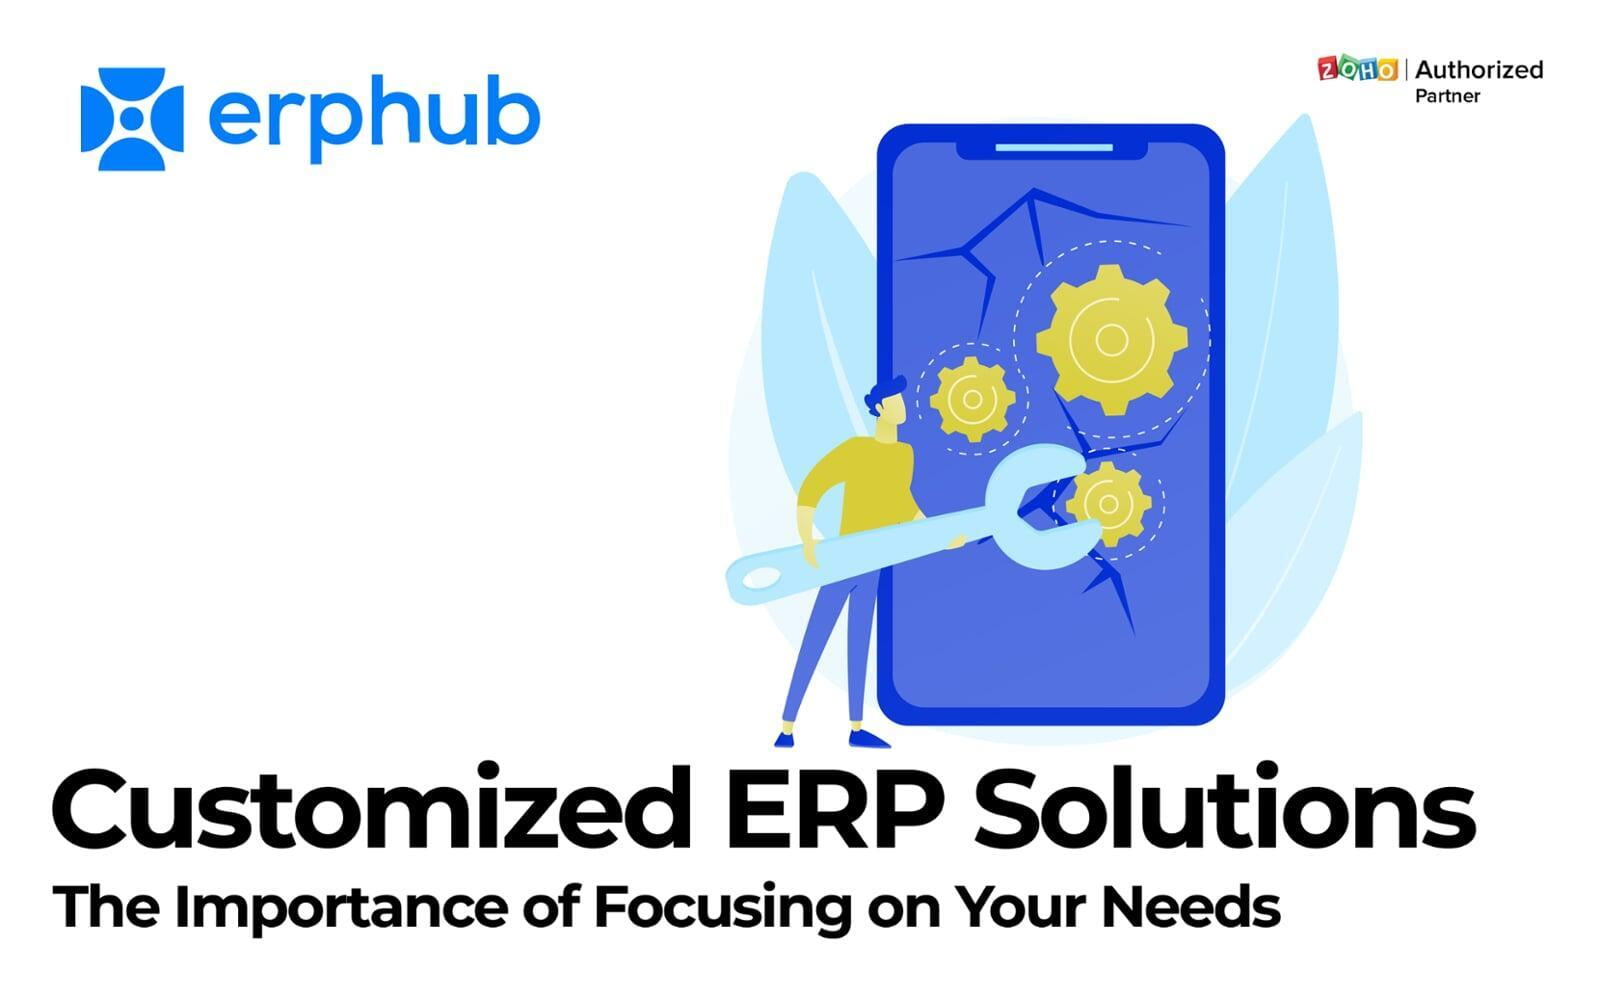 Customized ERP Solutions: The Importance of Focusing on Your Needs